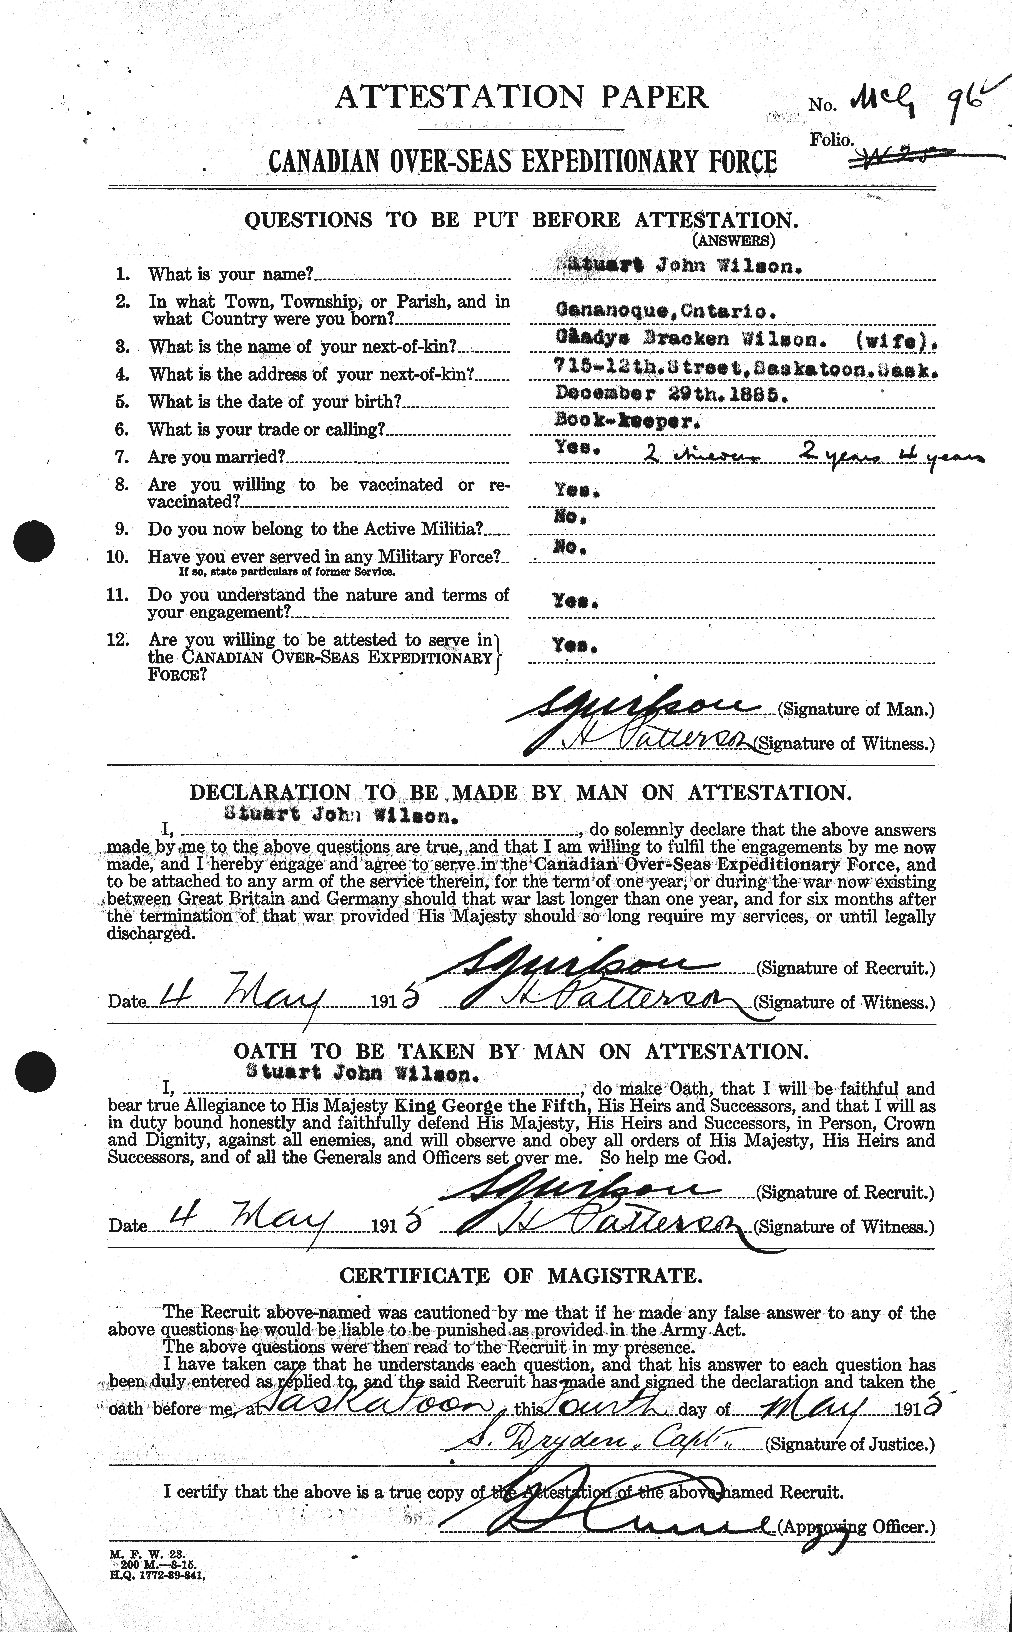 Personnel Records of the First World War - CEF 681155a